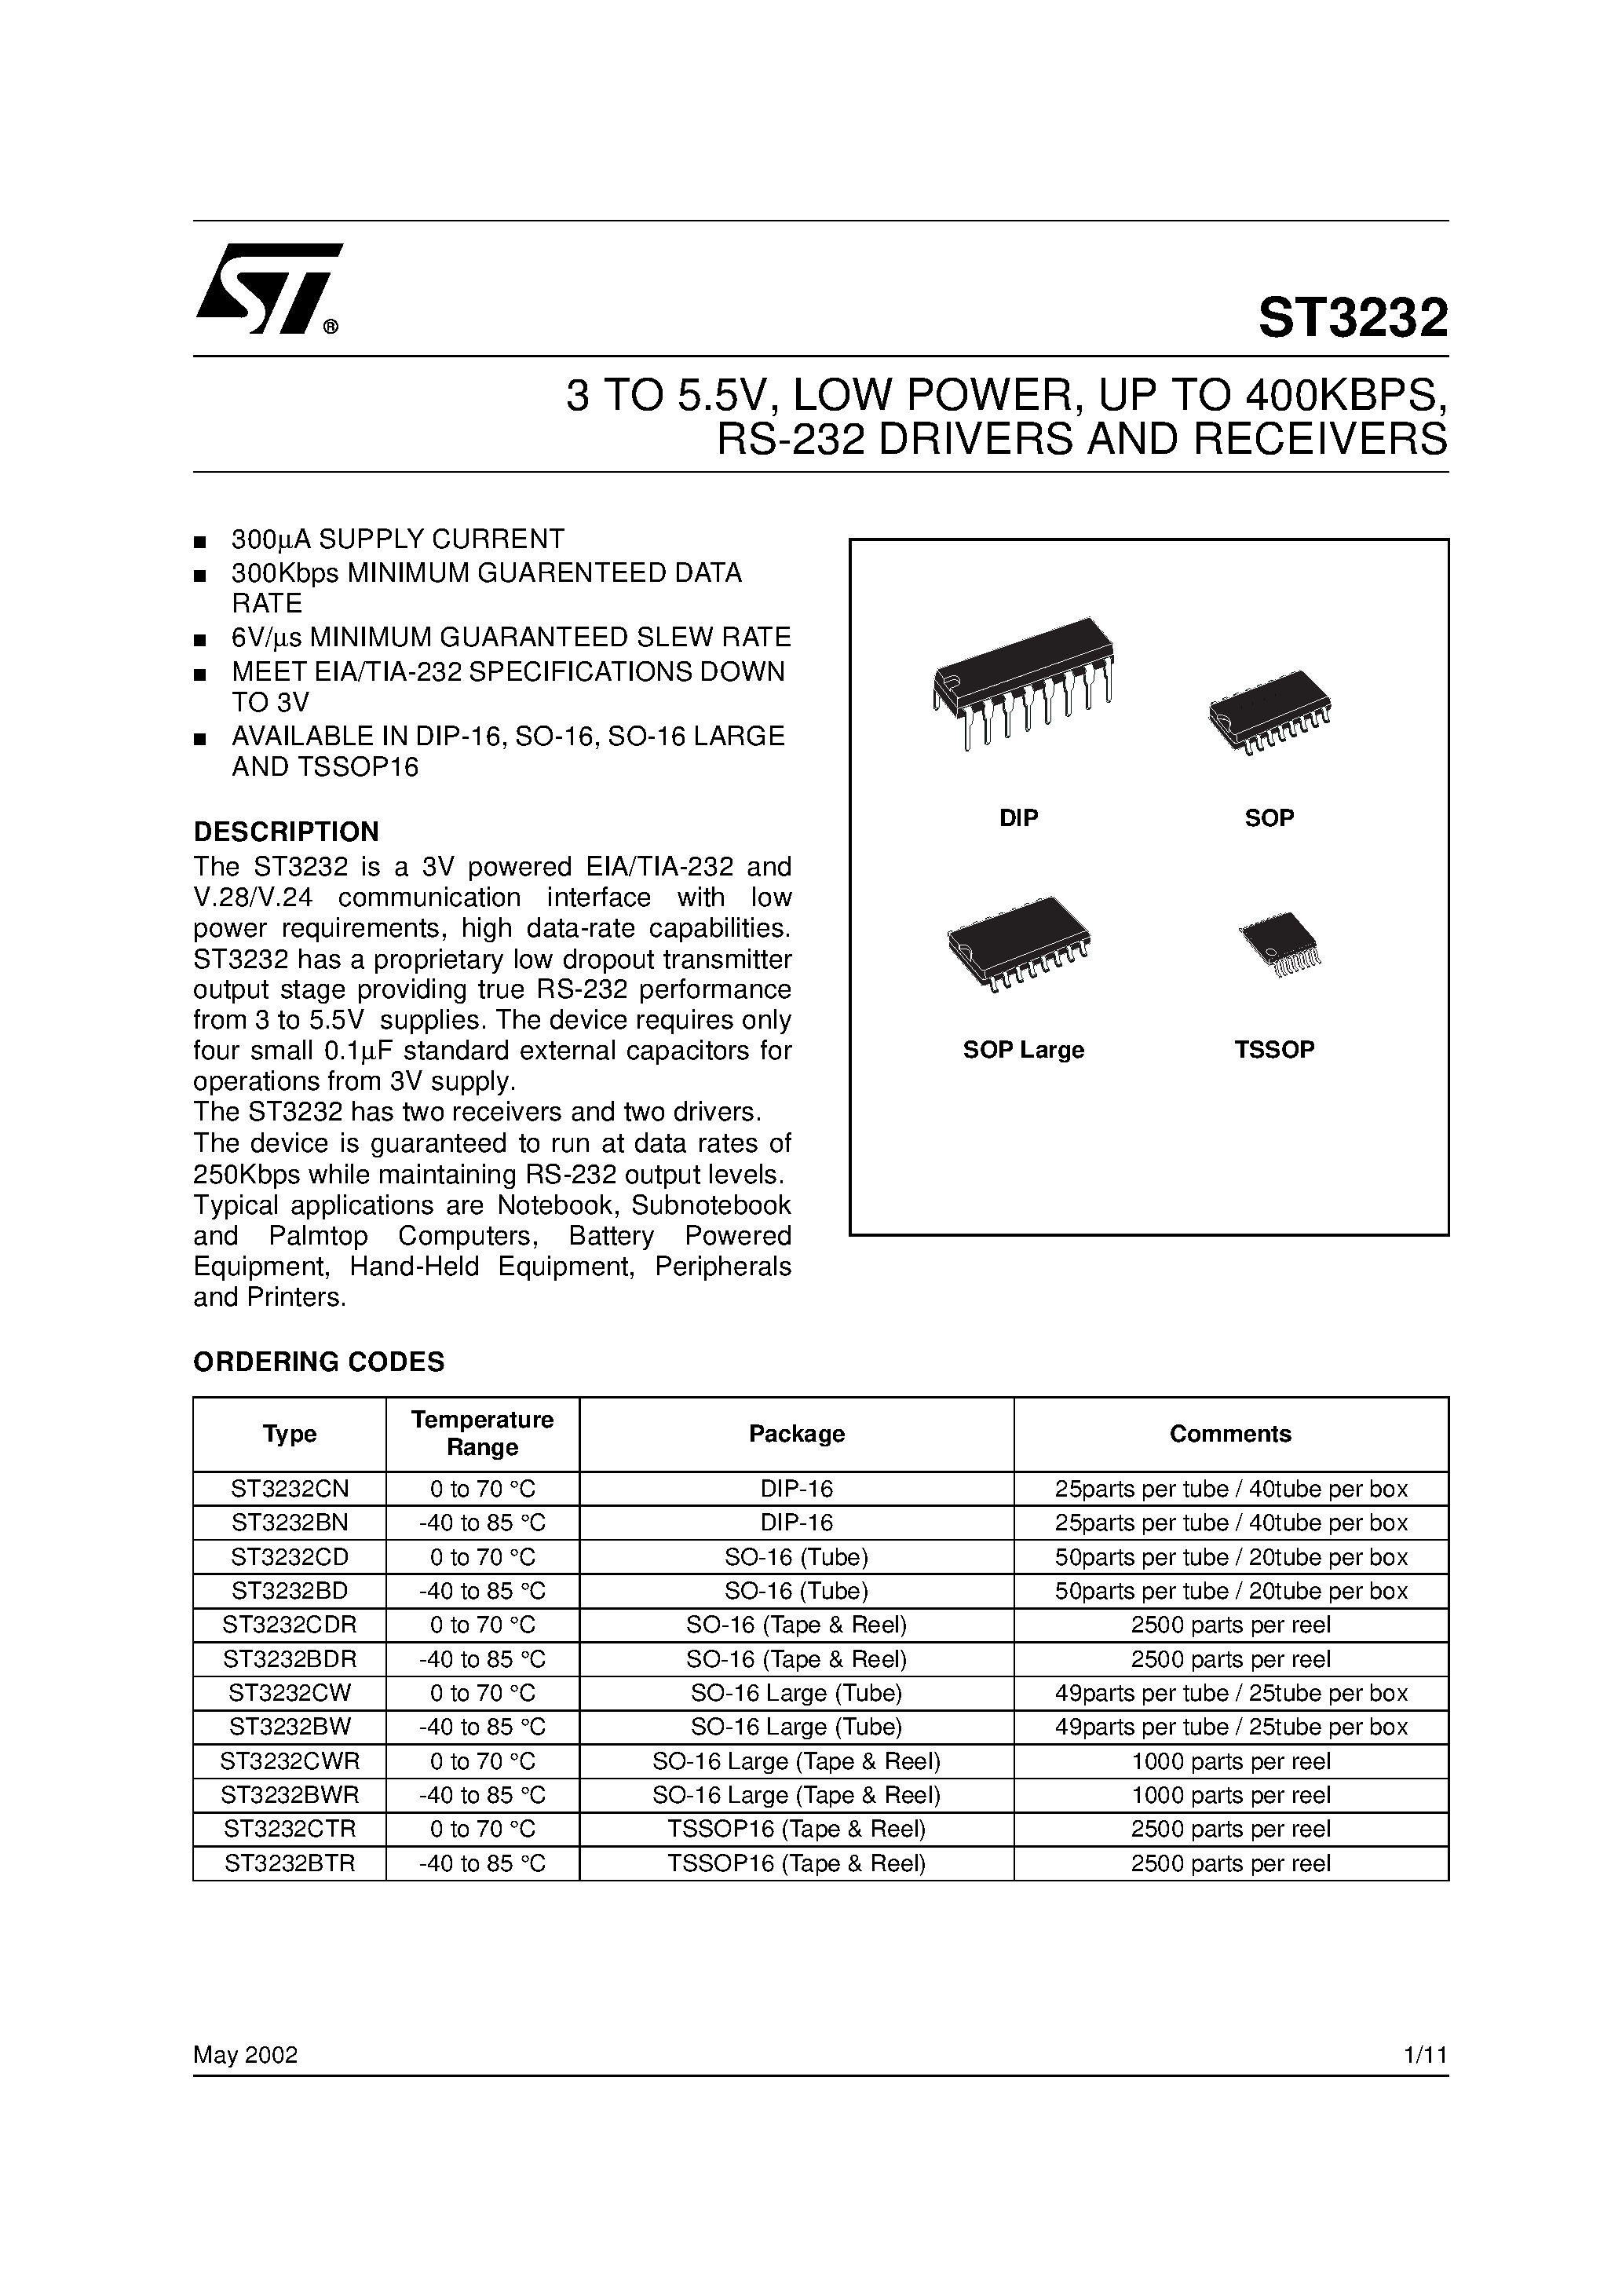 Datasheet ST3232 - RS-232 DRIVERS AND RECEIVERS page 1